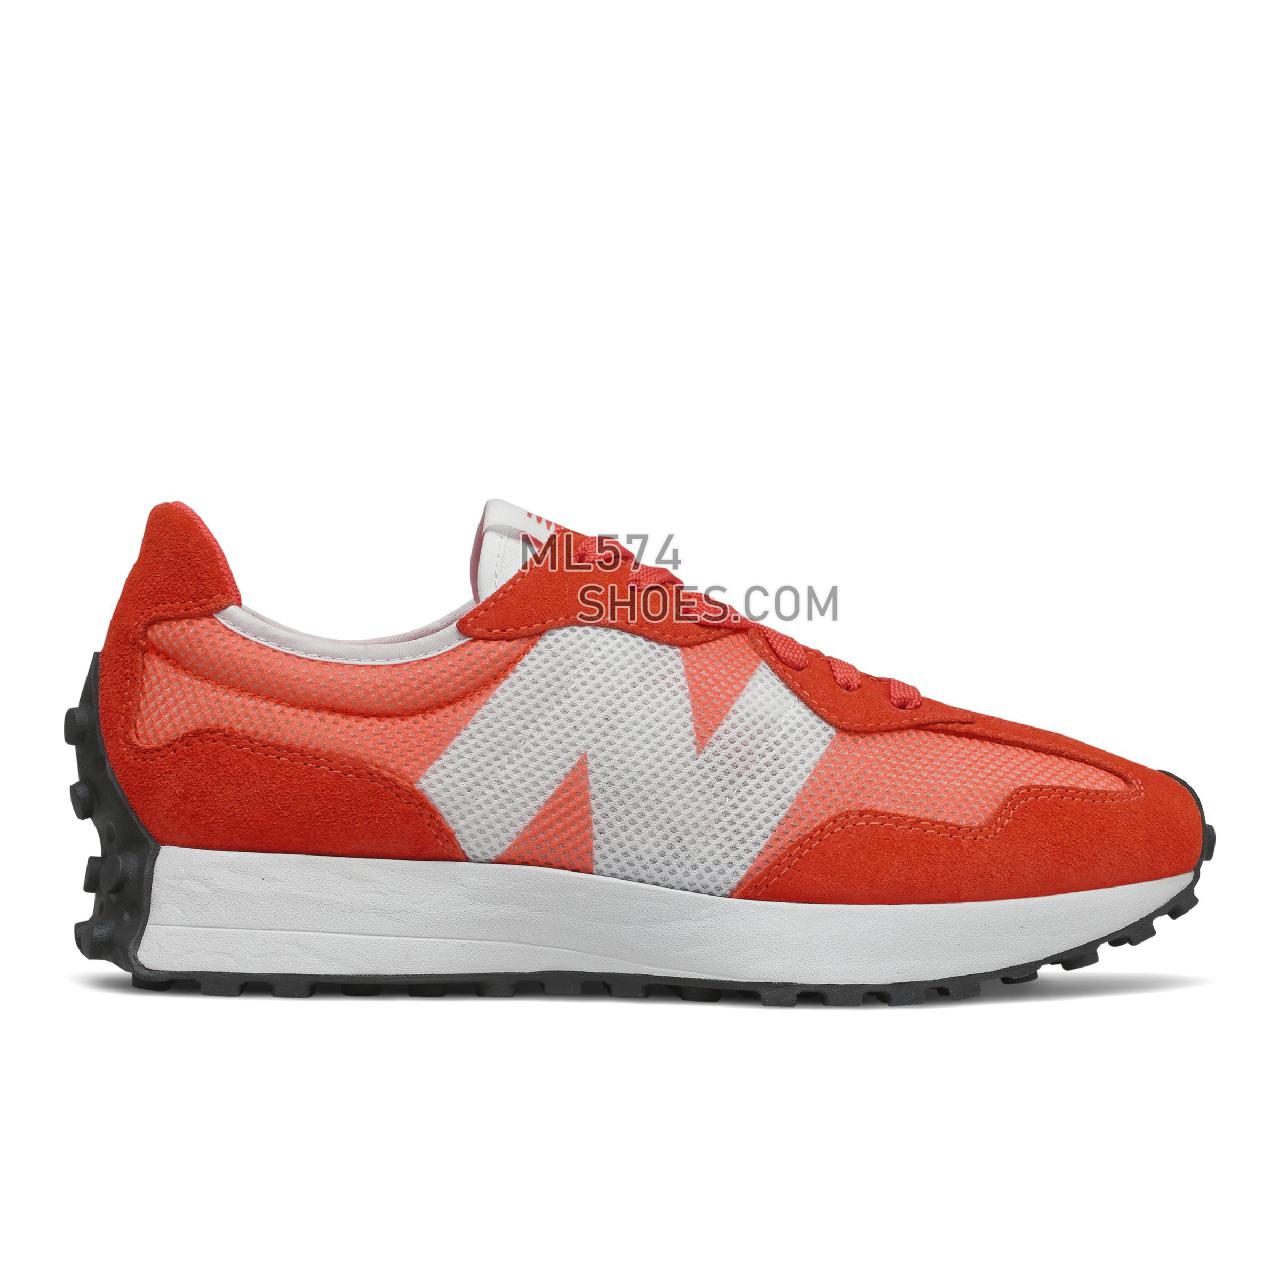 New Balance 327 - Men's Sport Style Sneakers - Ghost Pepper with Nb White - MS327BB